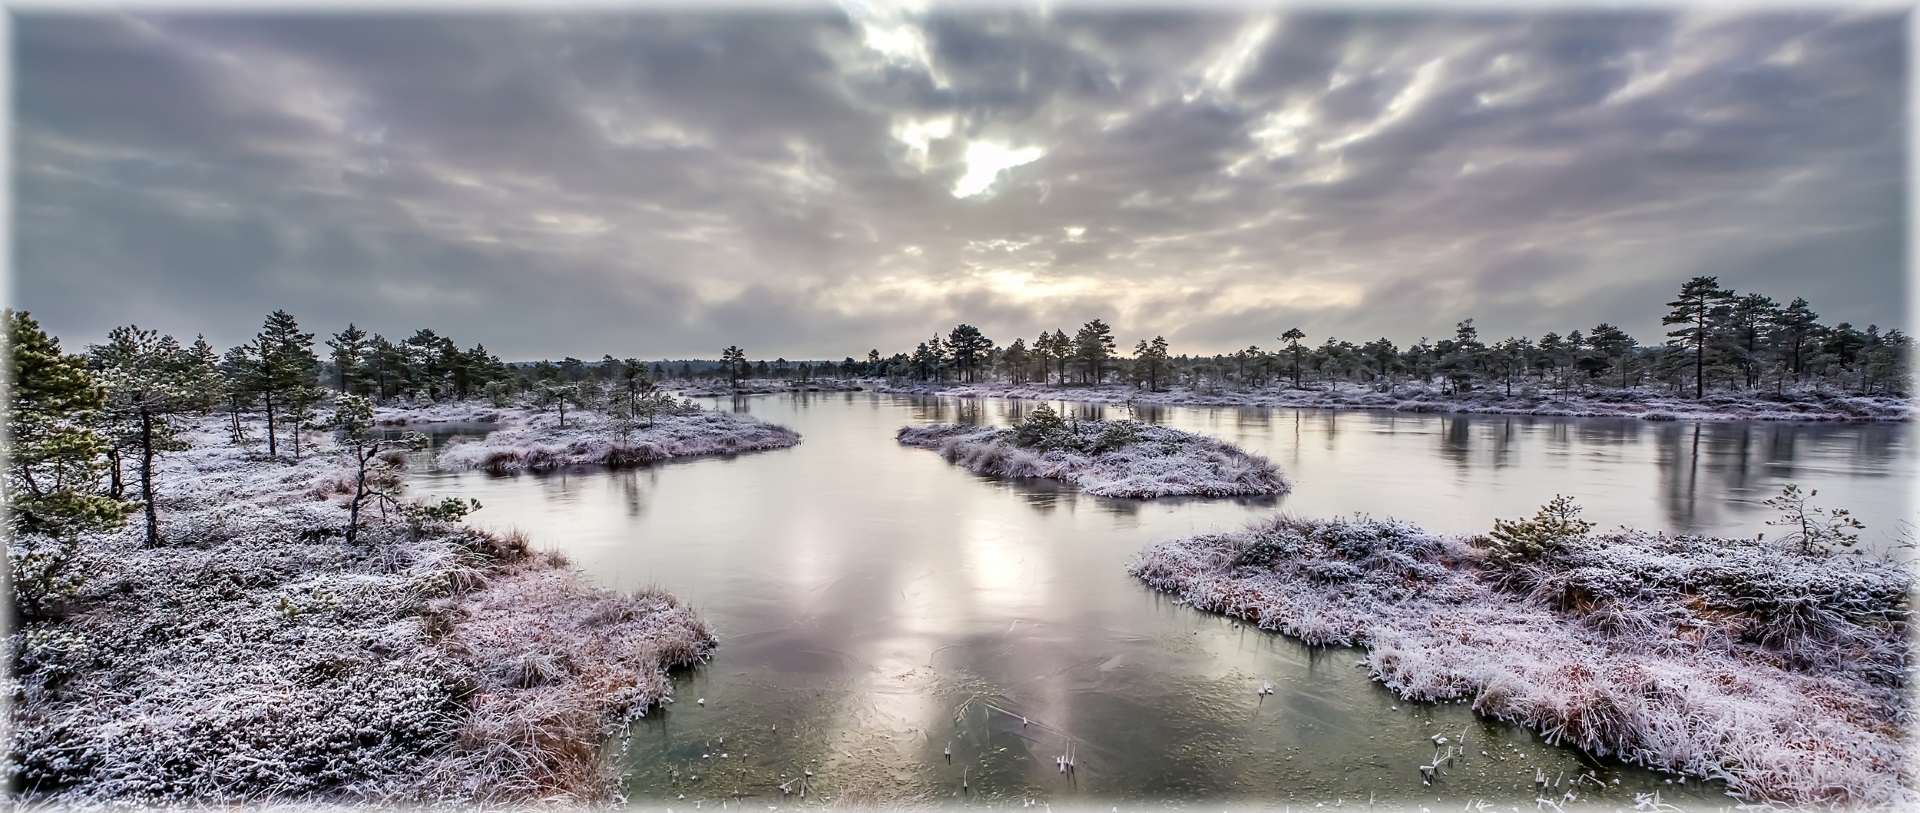 A view of a snowy frozen marshland.